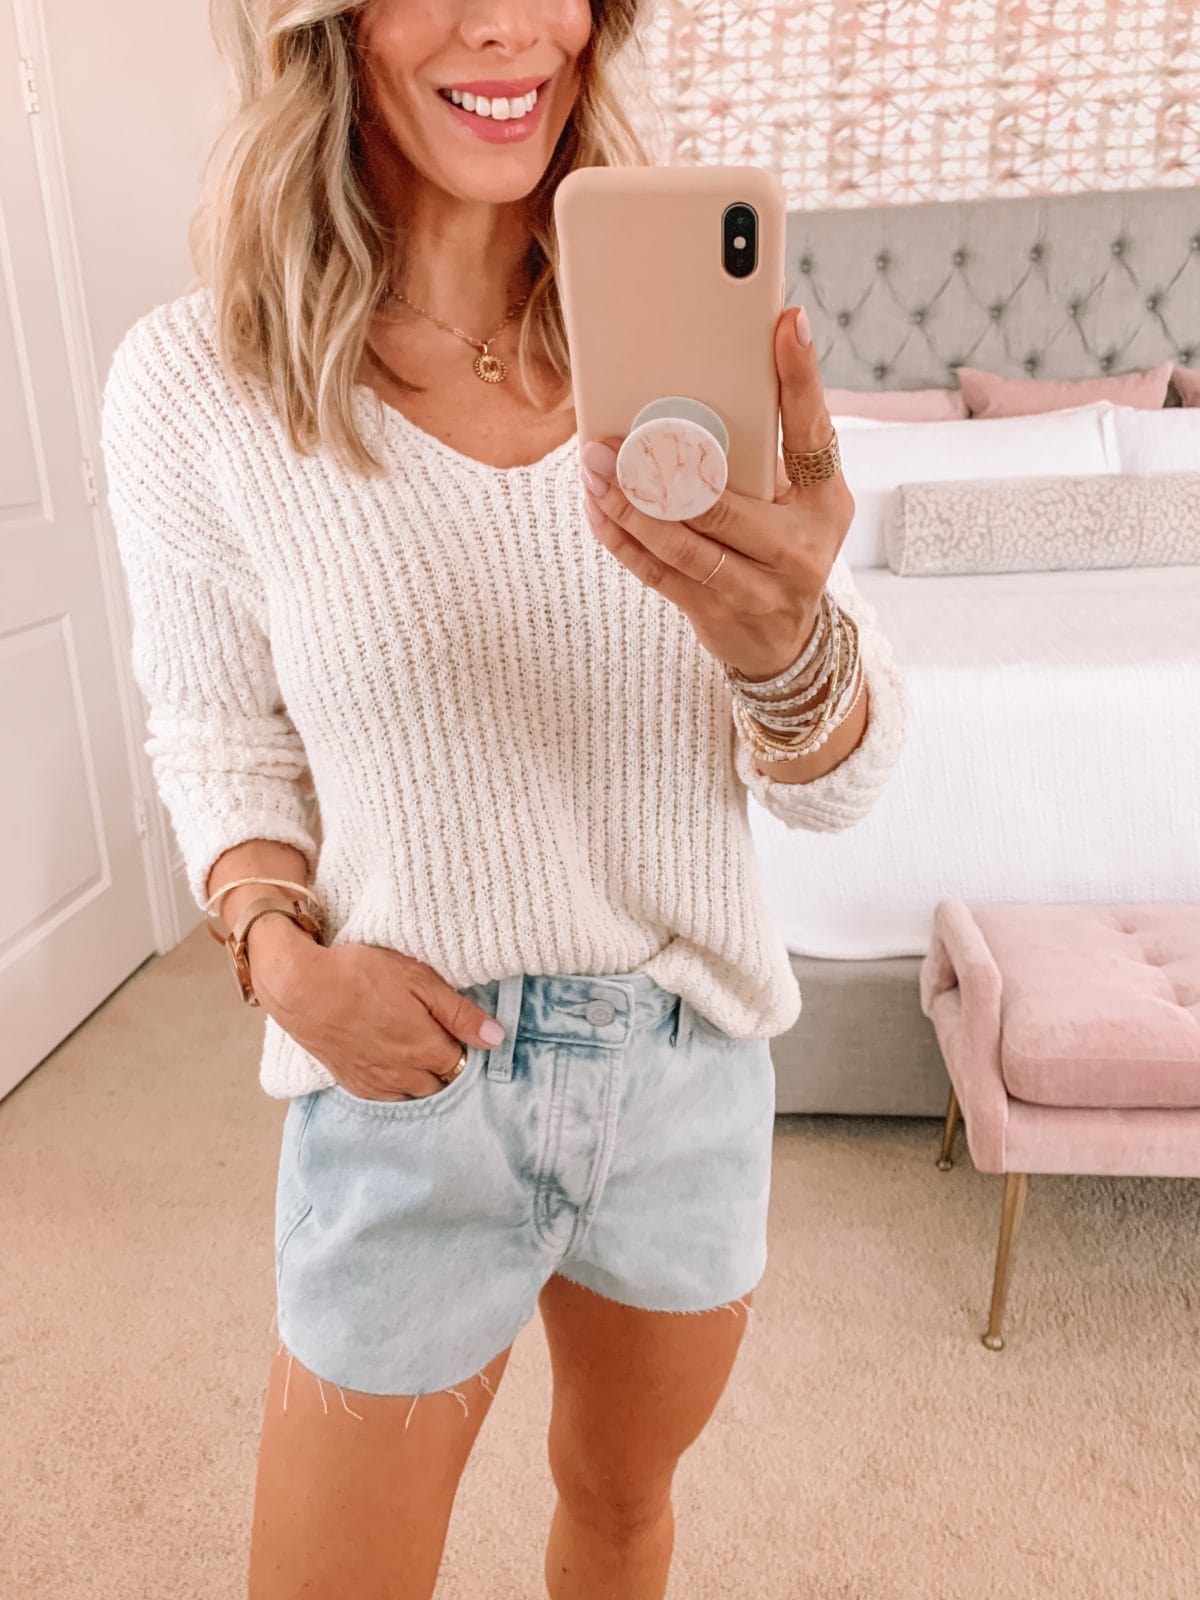 Dressing Room Finds, Summer Sweater and Denim Shorts with Sandals 